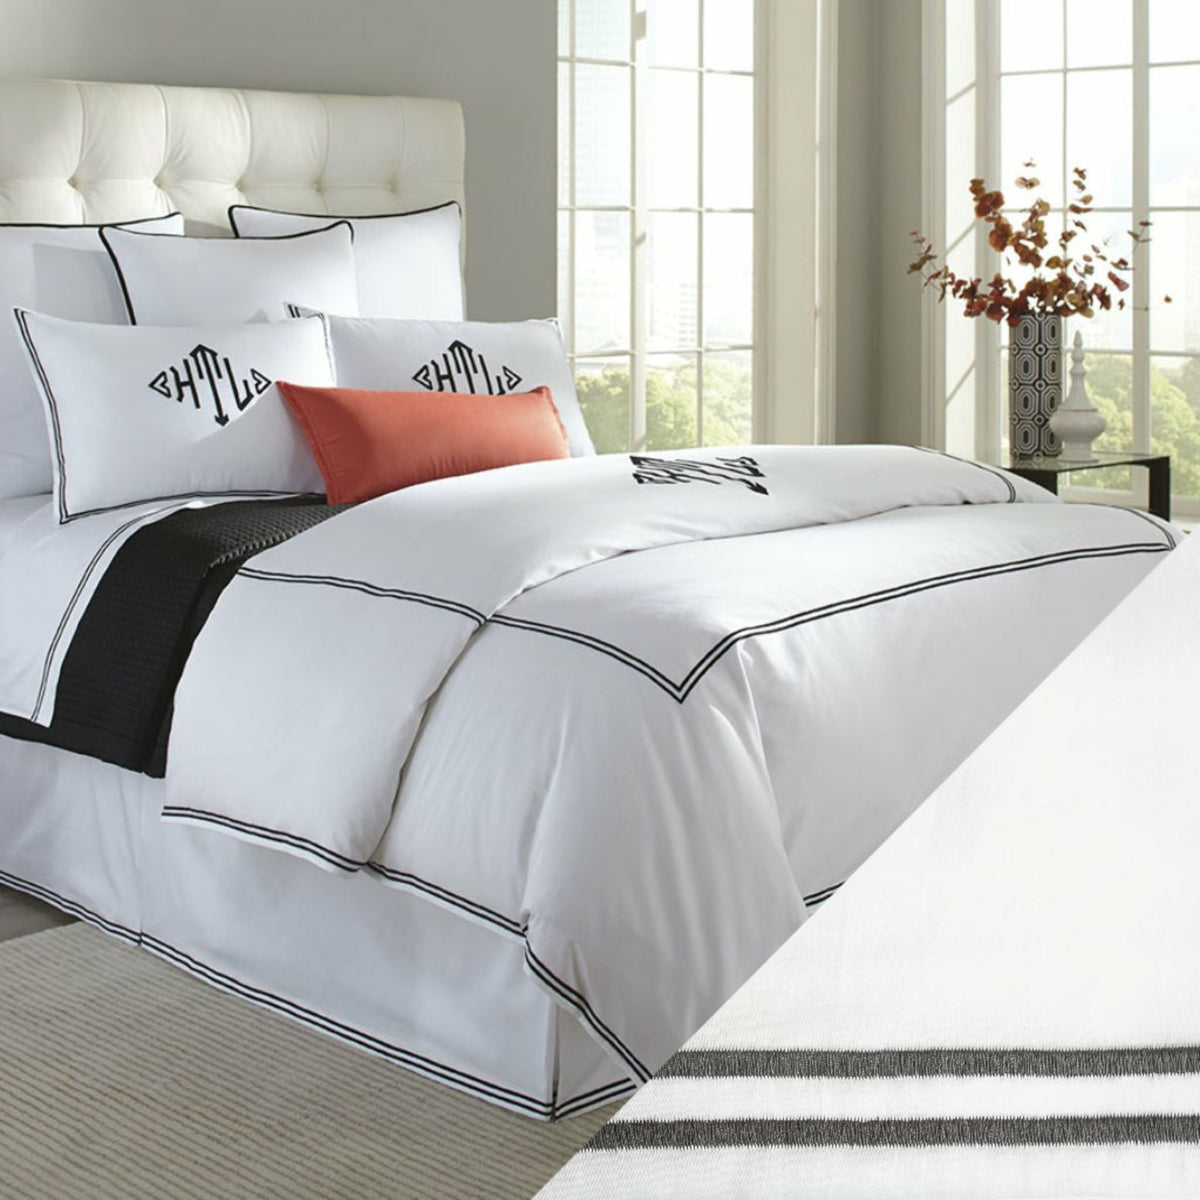 Home Treasures Madison Royal Sateen Hotel Bedding IvoryGrisaglia Gray Fine Linens